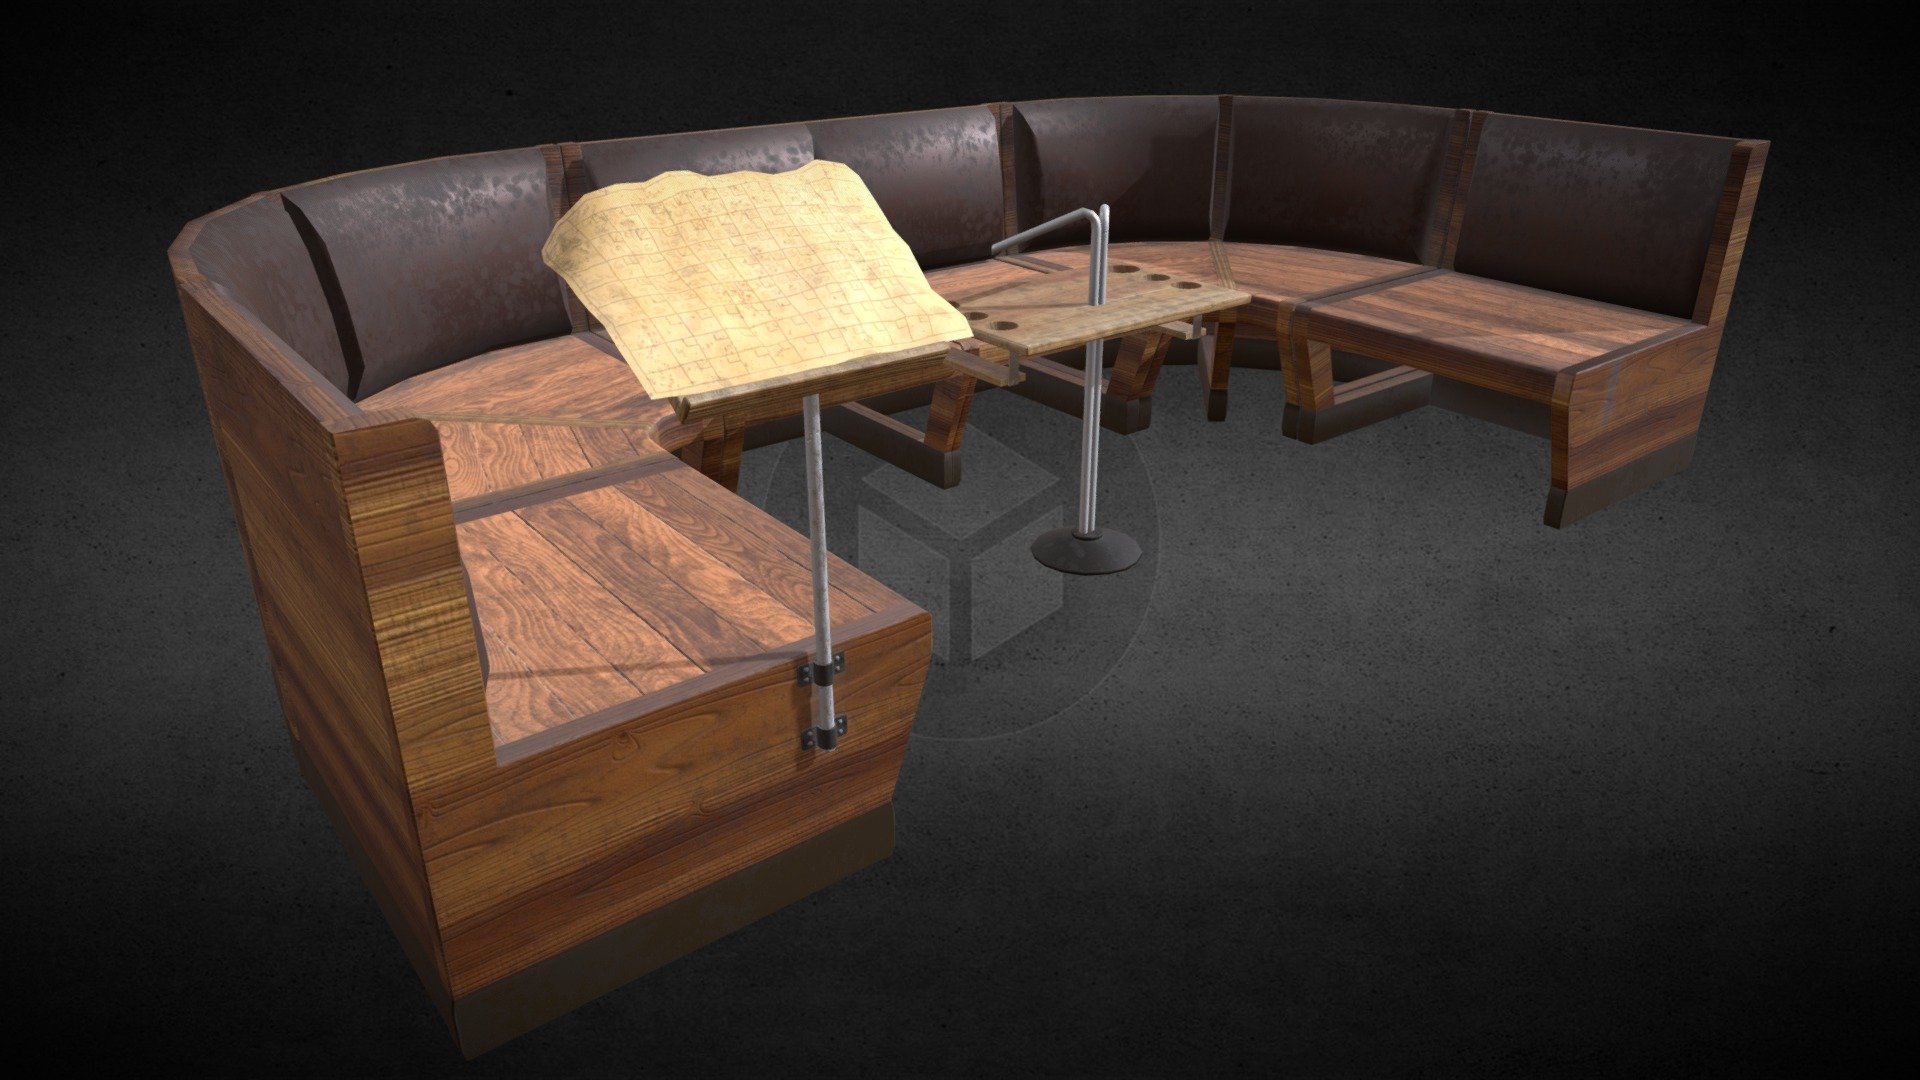 This bowling alley seatting bench with tables and score sheet is from a 3D environment that I made at Full Sail University. Revisiting this project I cleaned up some geometry, laid out new UVs, and gave the model new textures. I added dirt, fingerprints, and dust to the textures with substance painter generator effects. When I initially made this environment I barely scratched the surface of what I could produce with substance painter 3d model